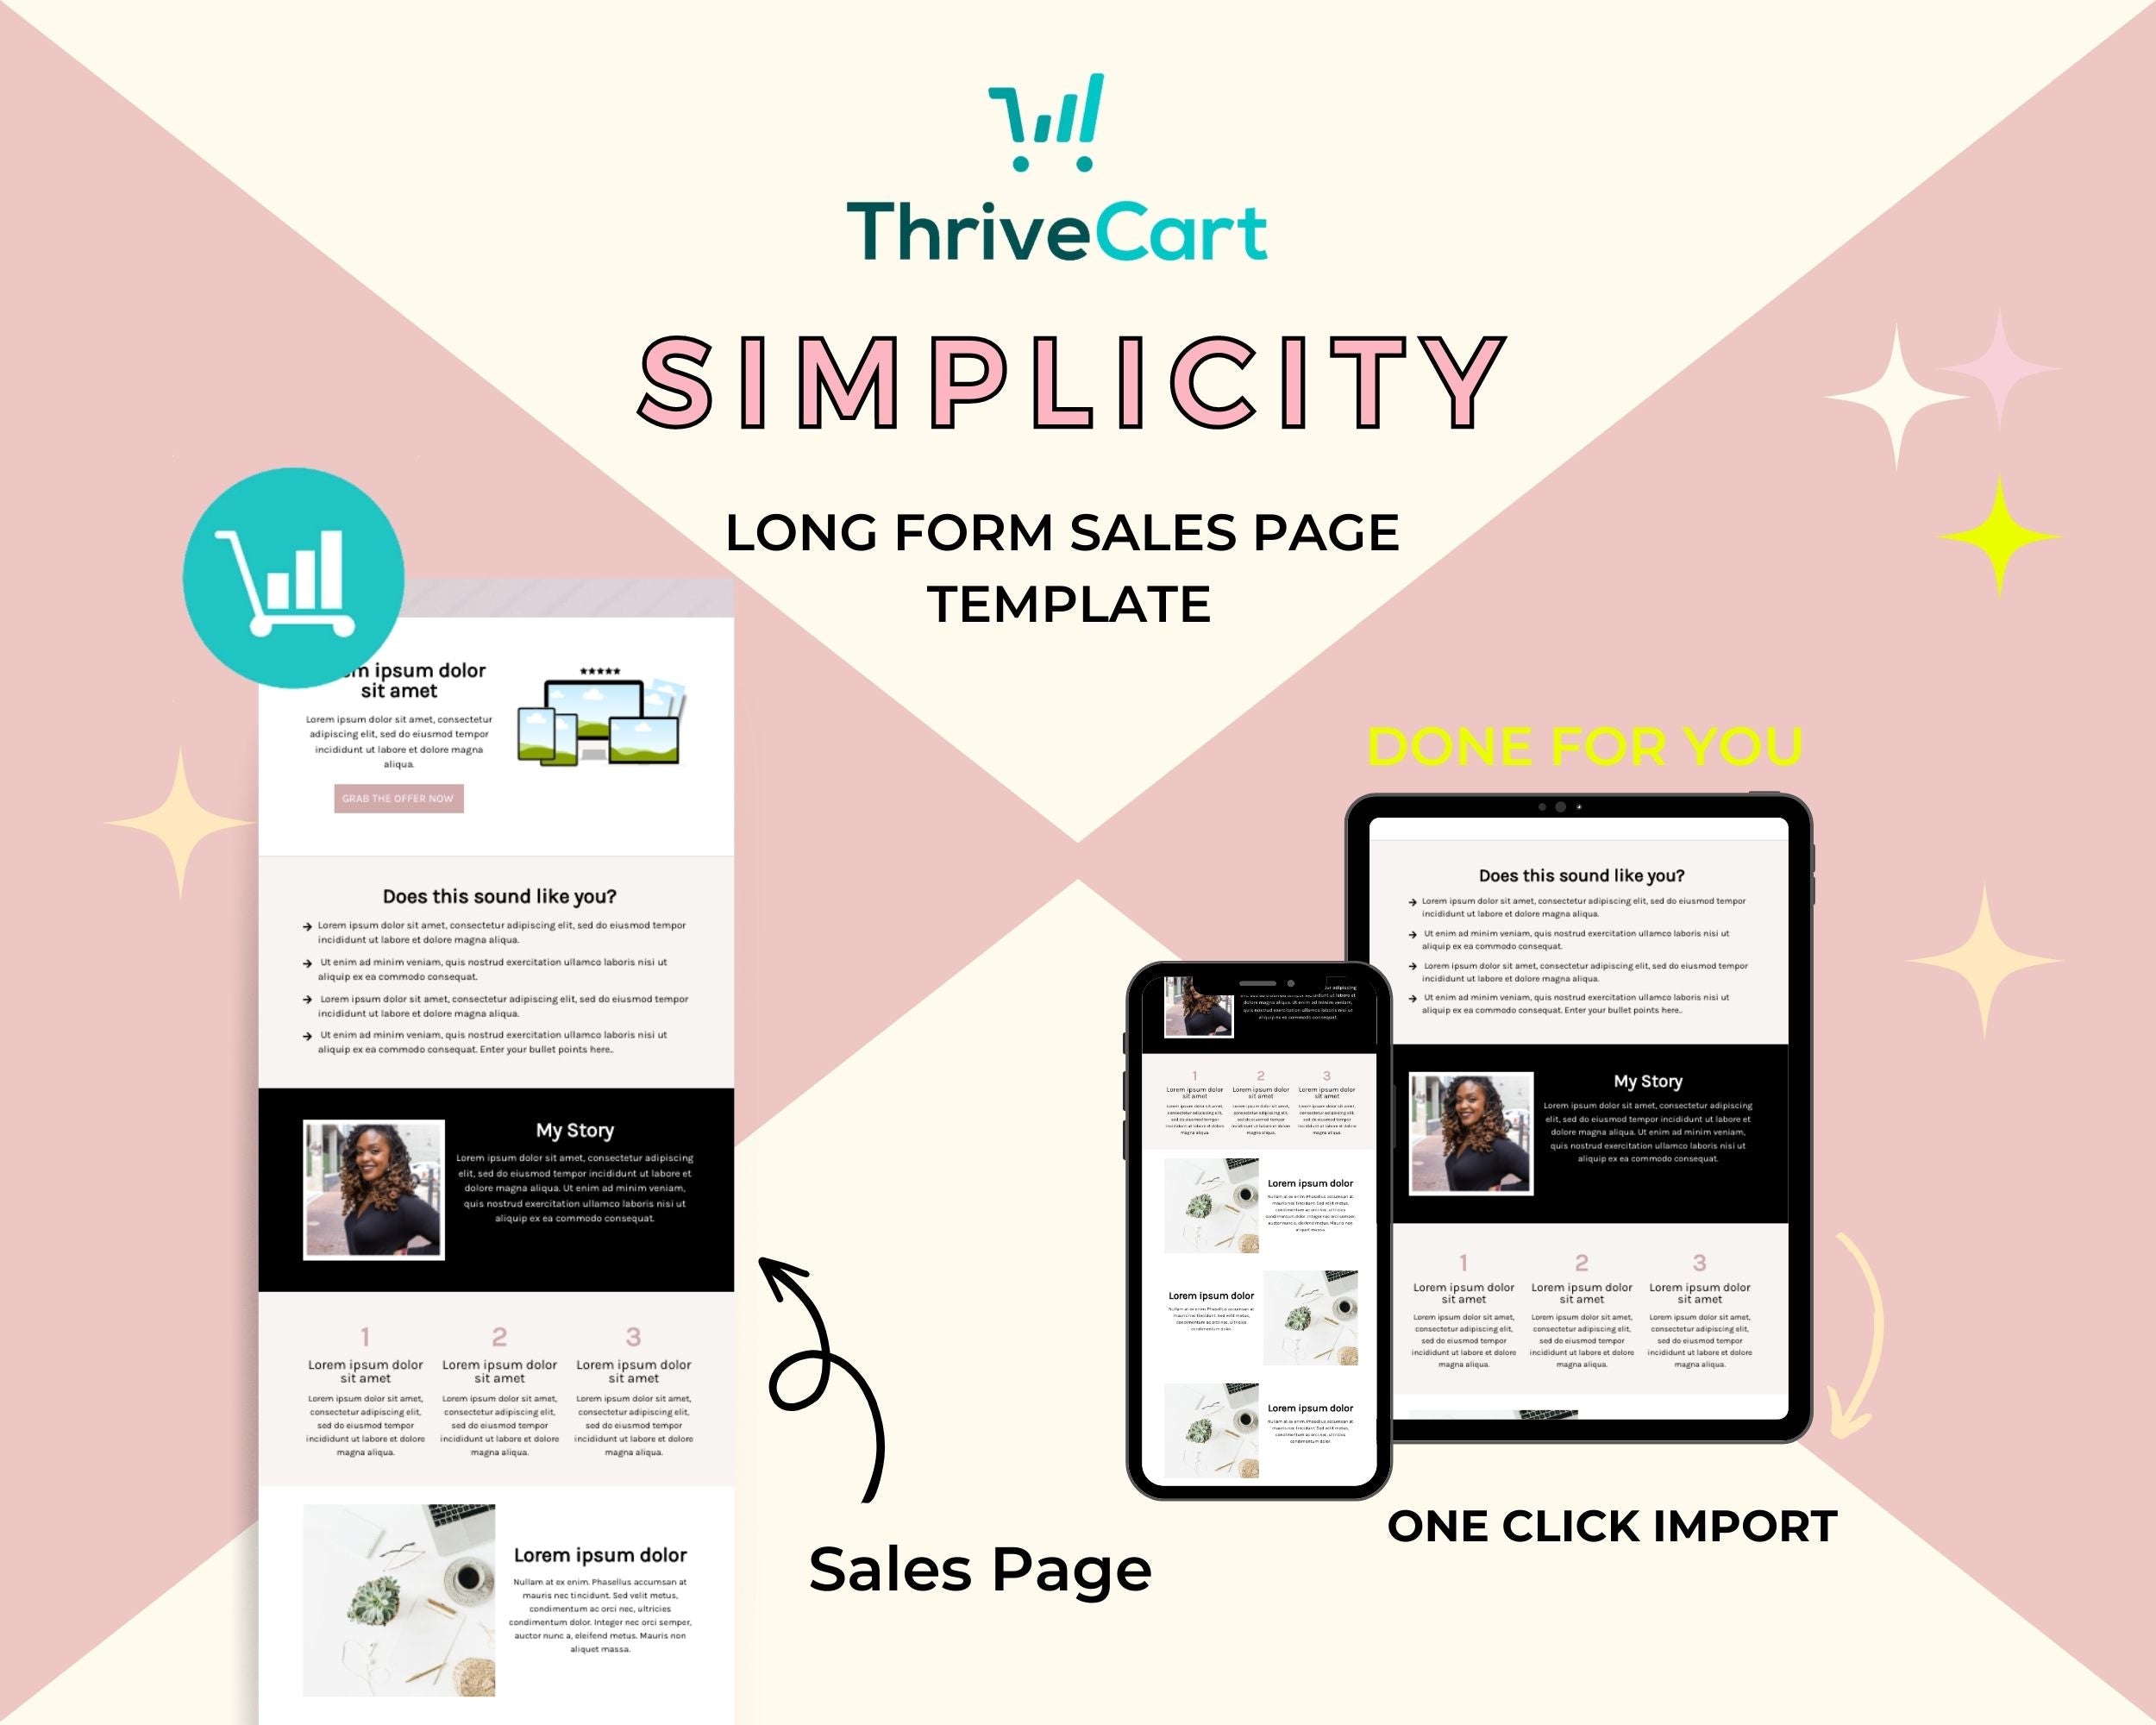 Simplicity Sales Page Template in ThriveCart